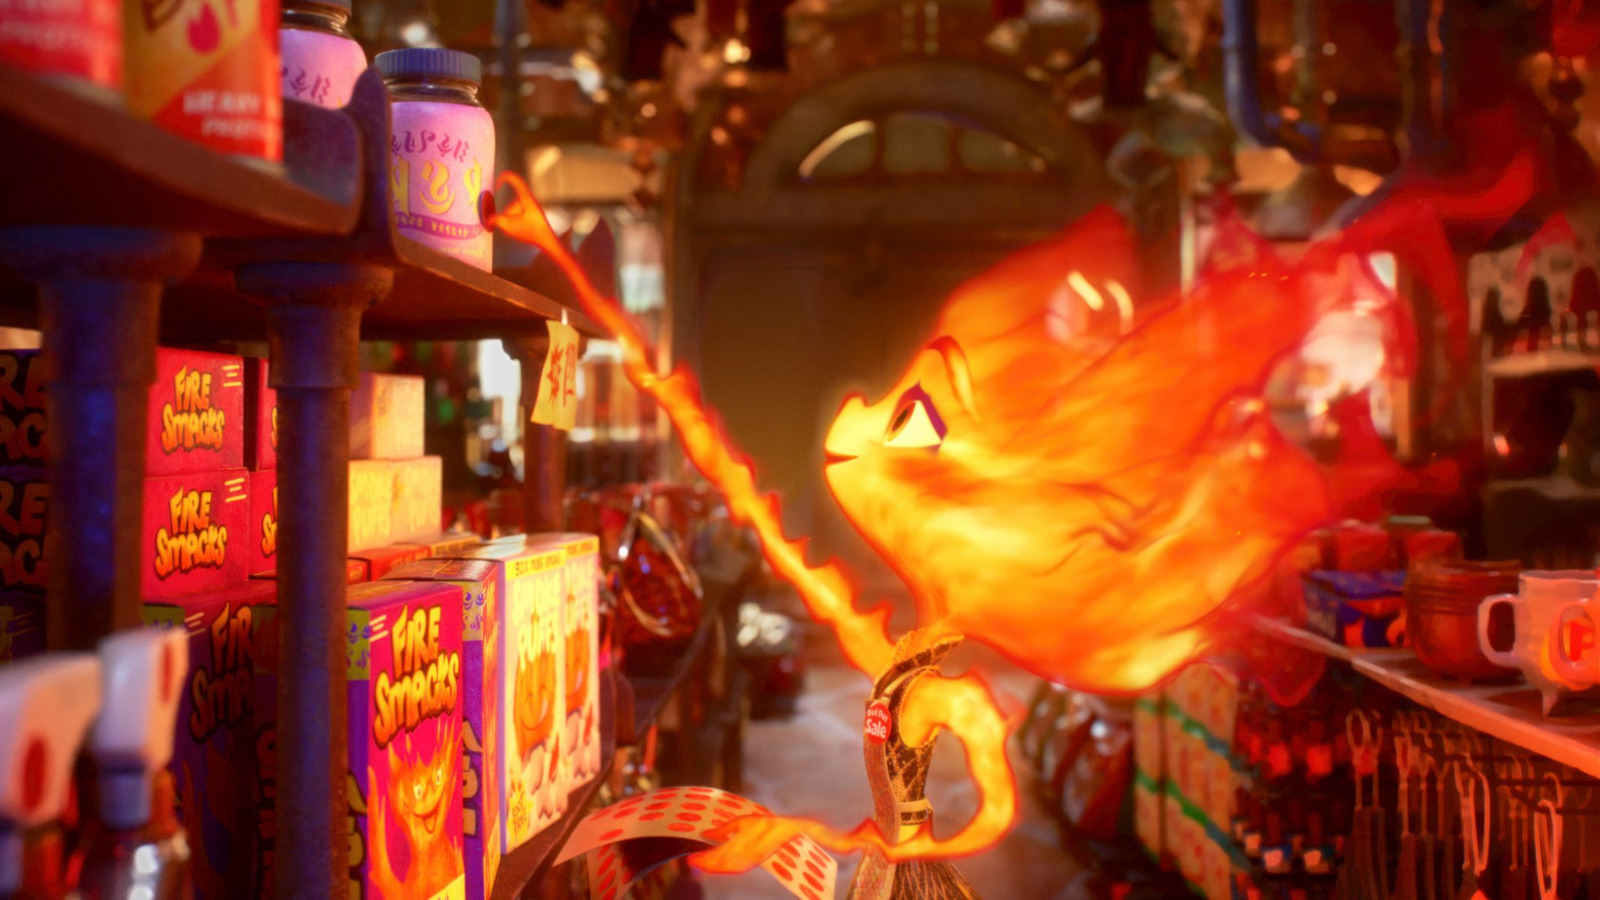 Pixar’s Elemental has so many assorted snacks, drinks, and in-universe merchandise